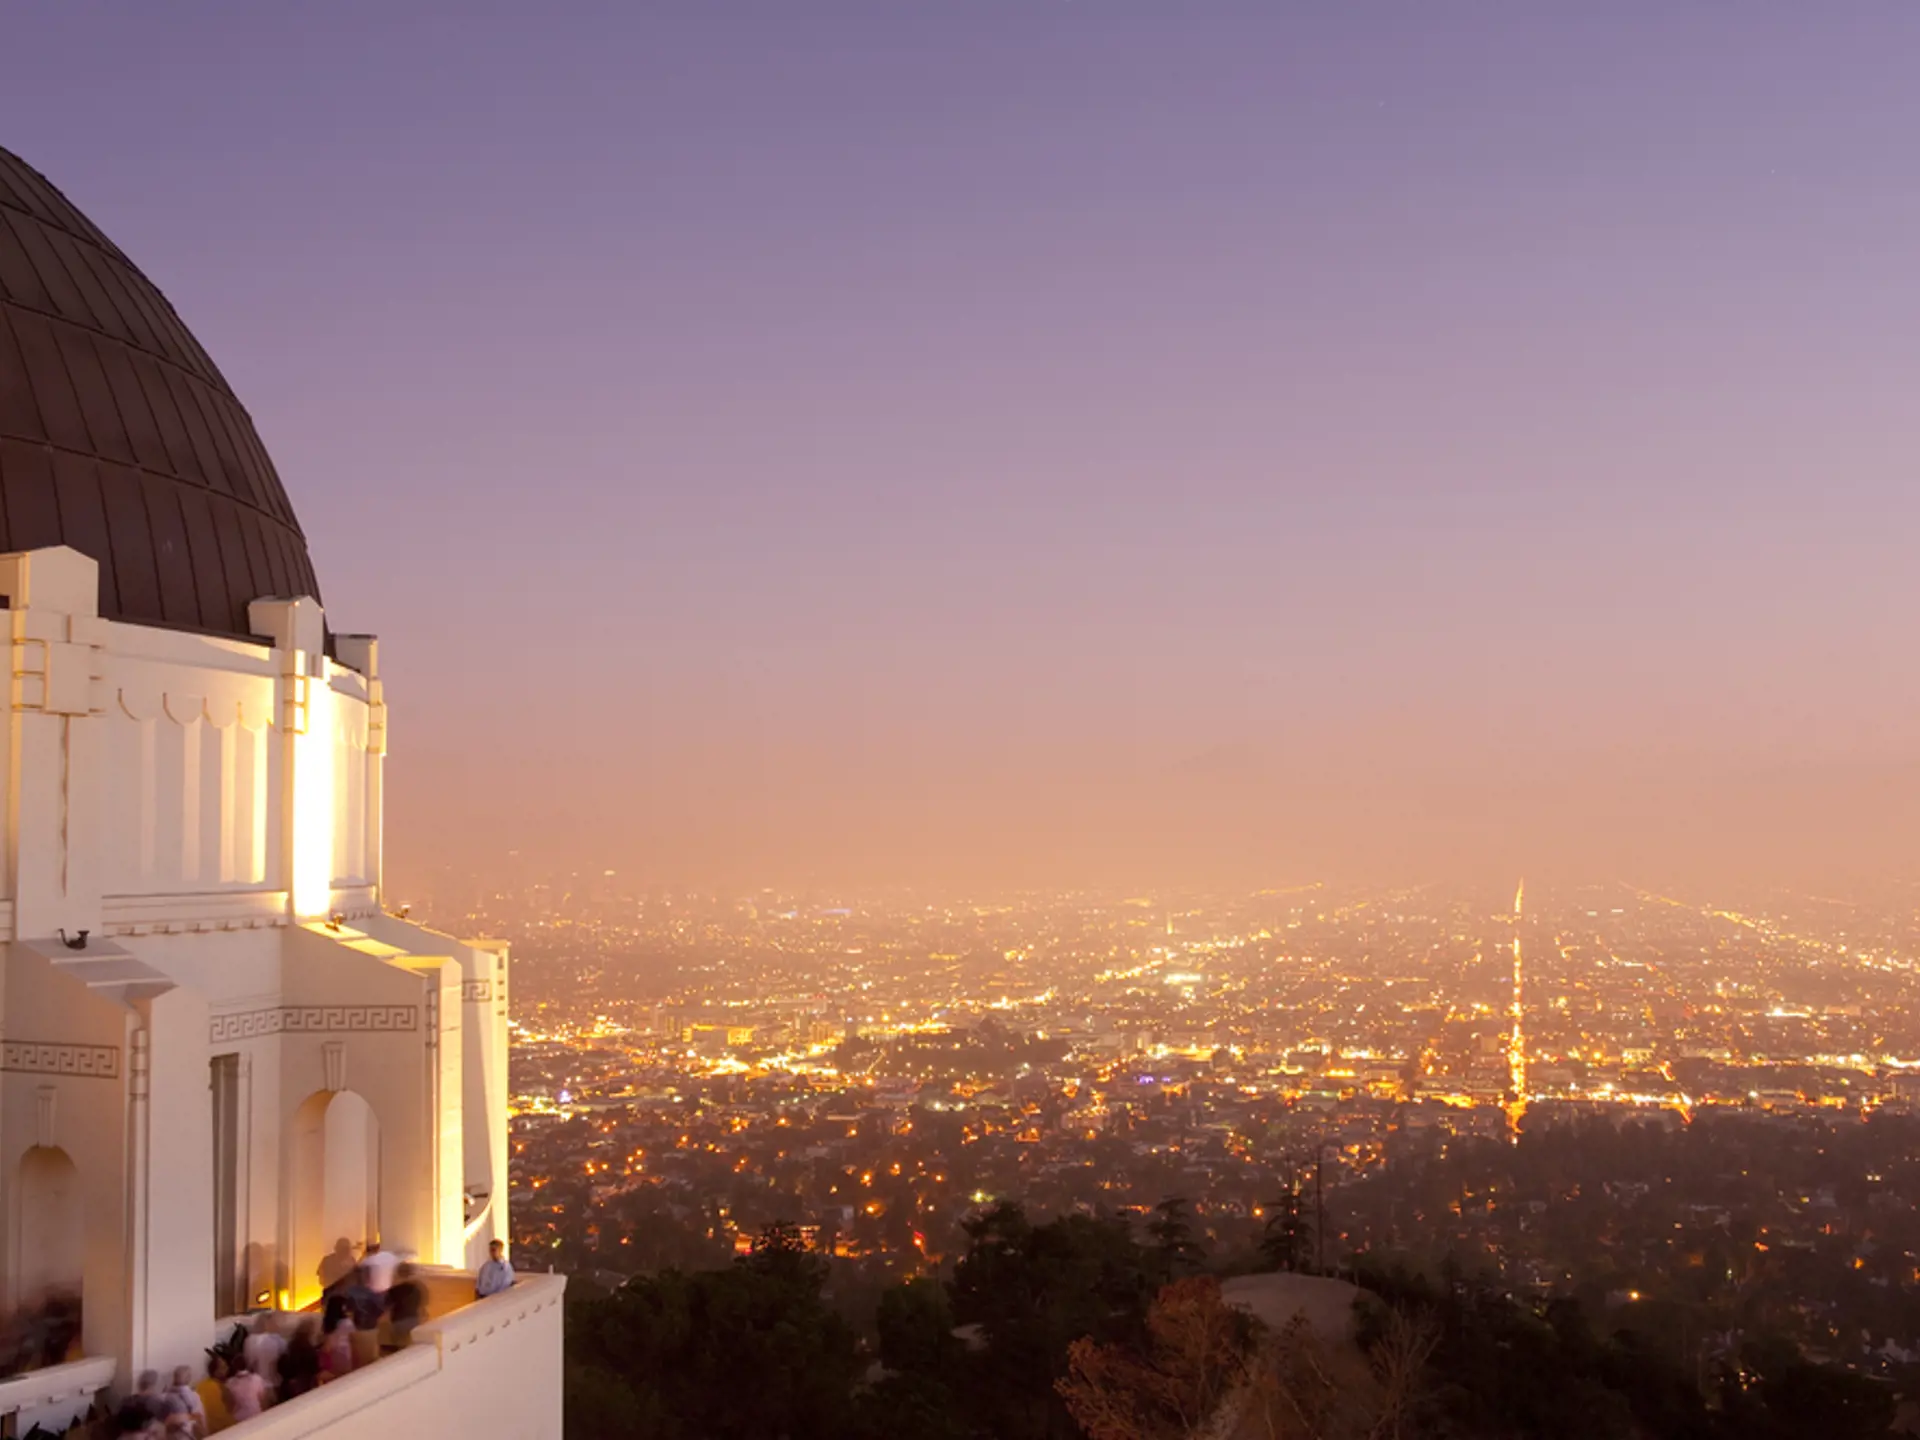 USA - California - Los Angeles - Griffith Observatory.jpg